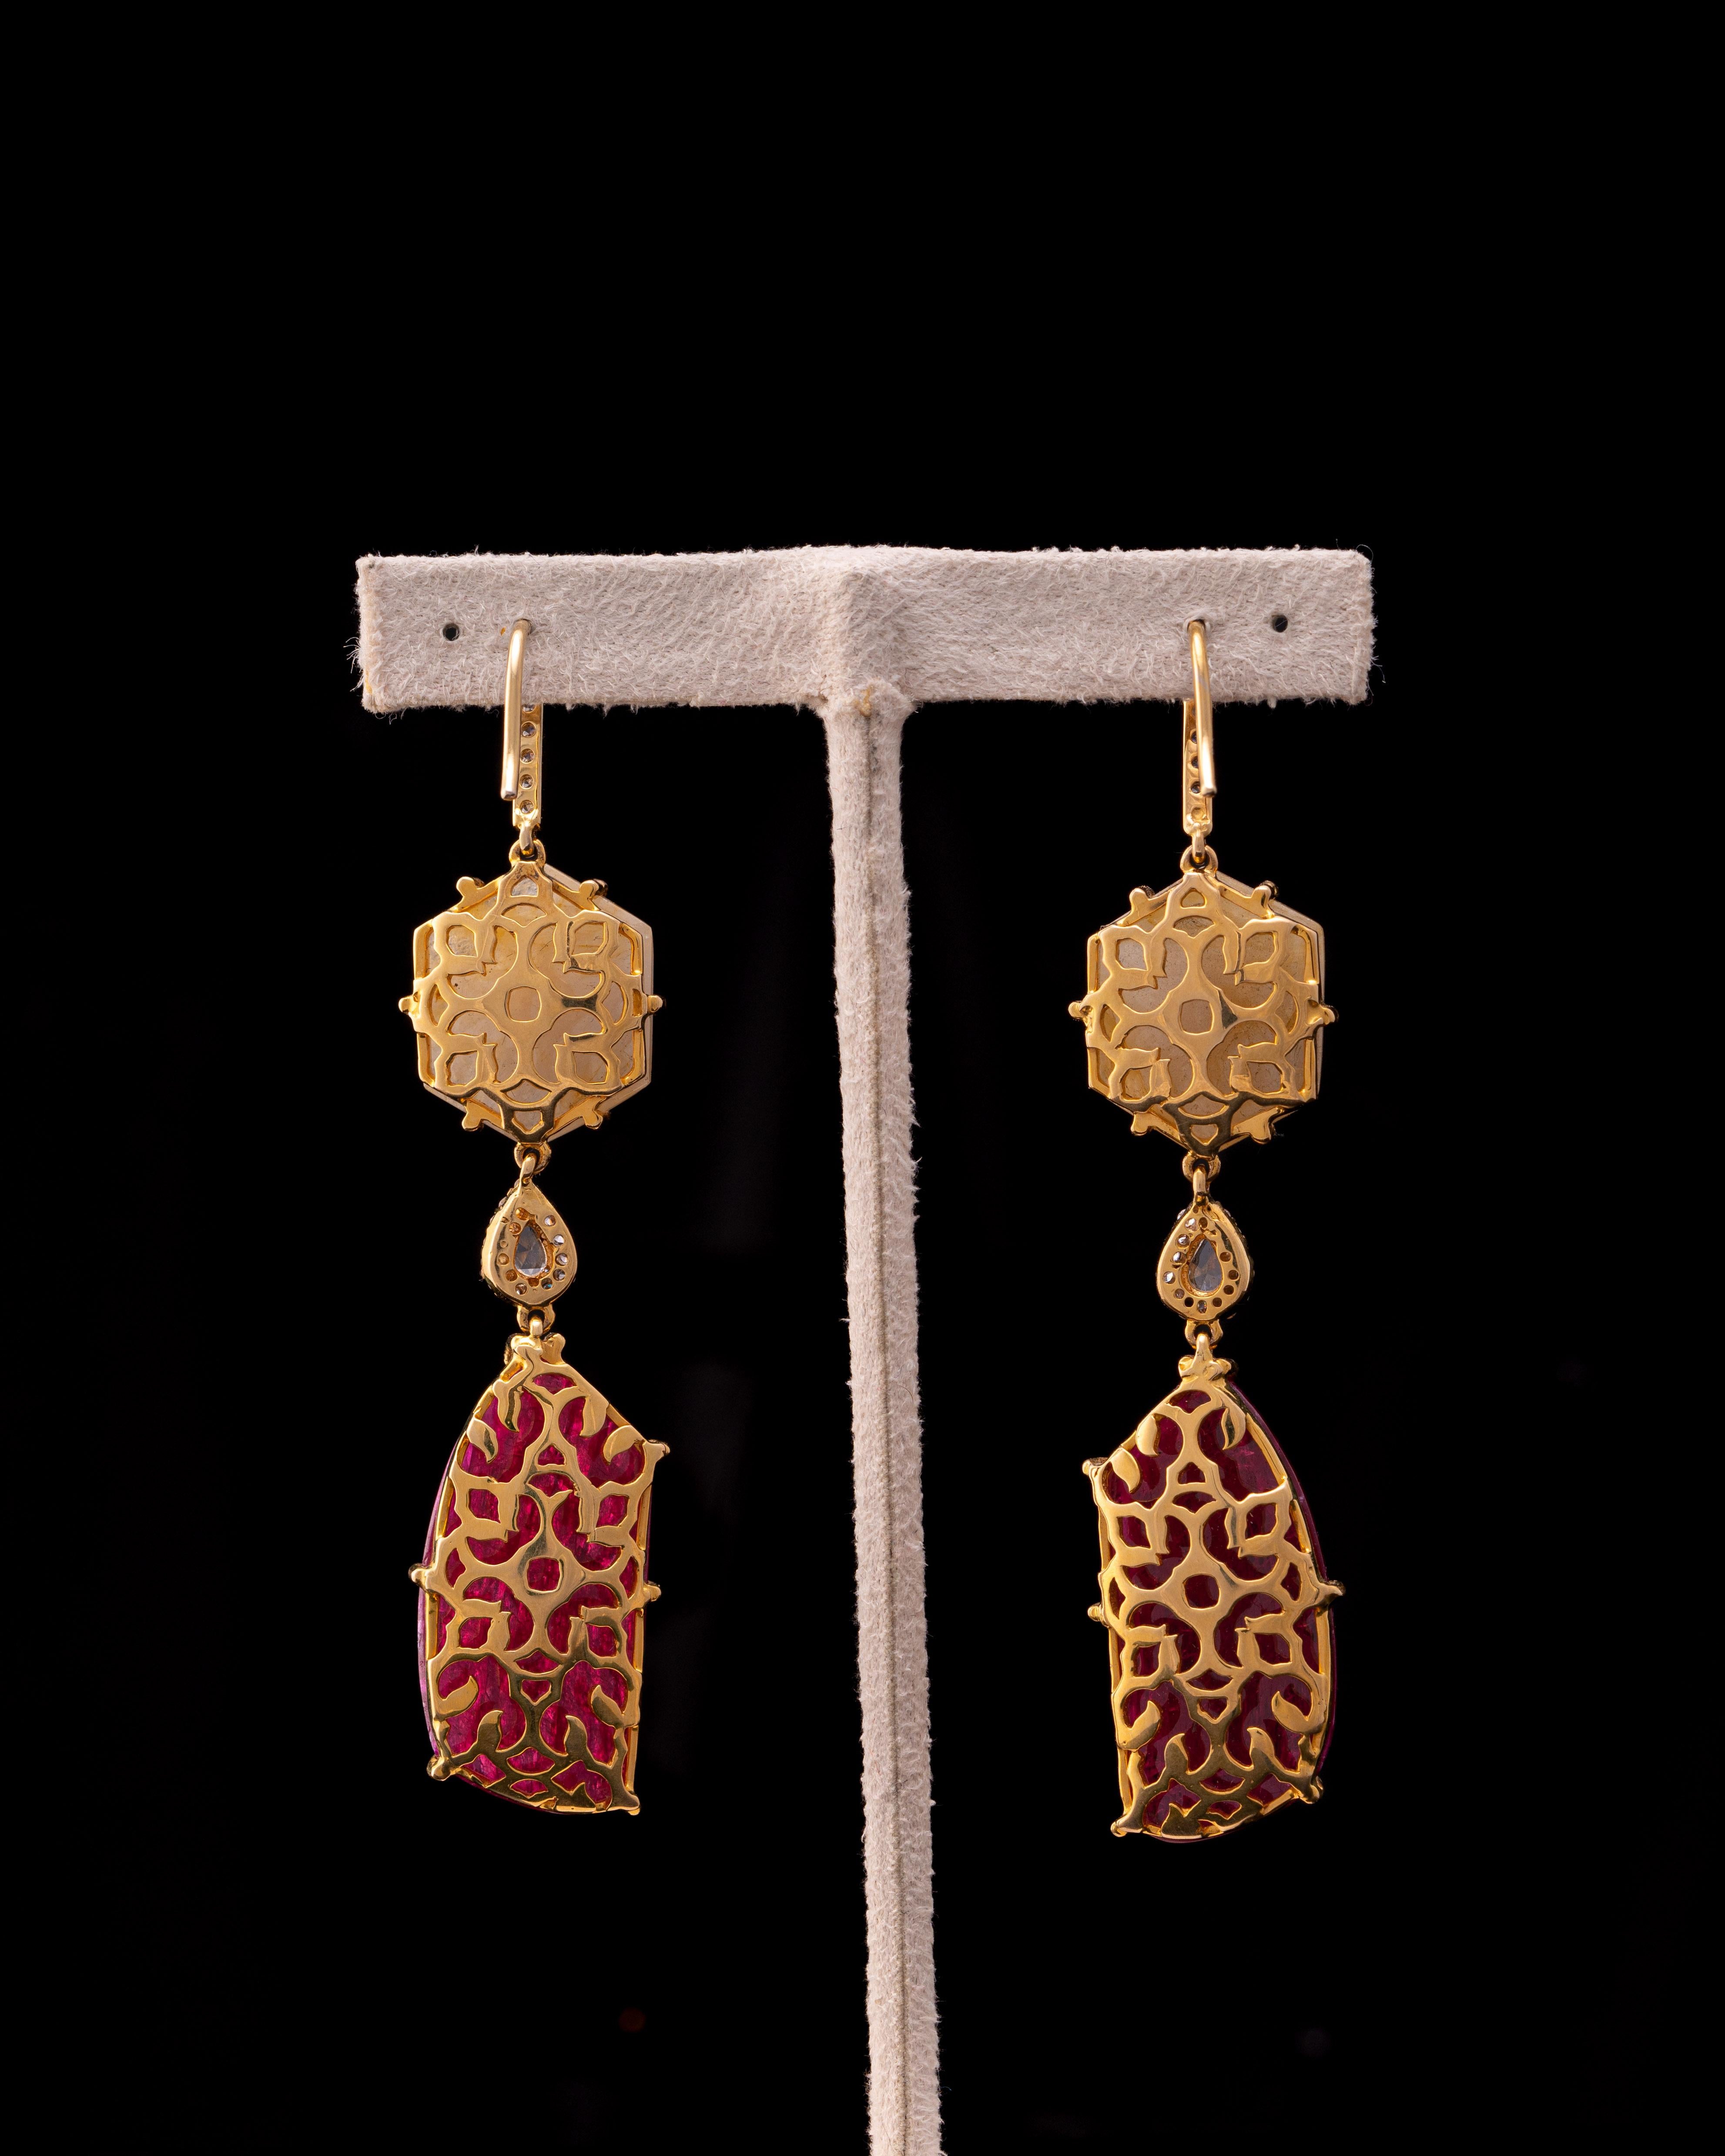 A pair of art-deco looking, 27.39 carat natural Ruby and 15.70 carat Yellow Sapphire dangle earrings, with 0.28 carat White Diamonds, all set in solid 18 K Yellow Gold. 
Please message us for more information. 
We provide free shipping, and accept